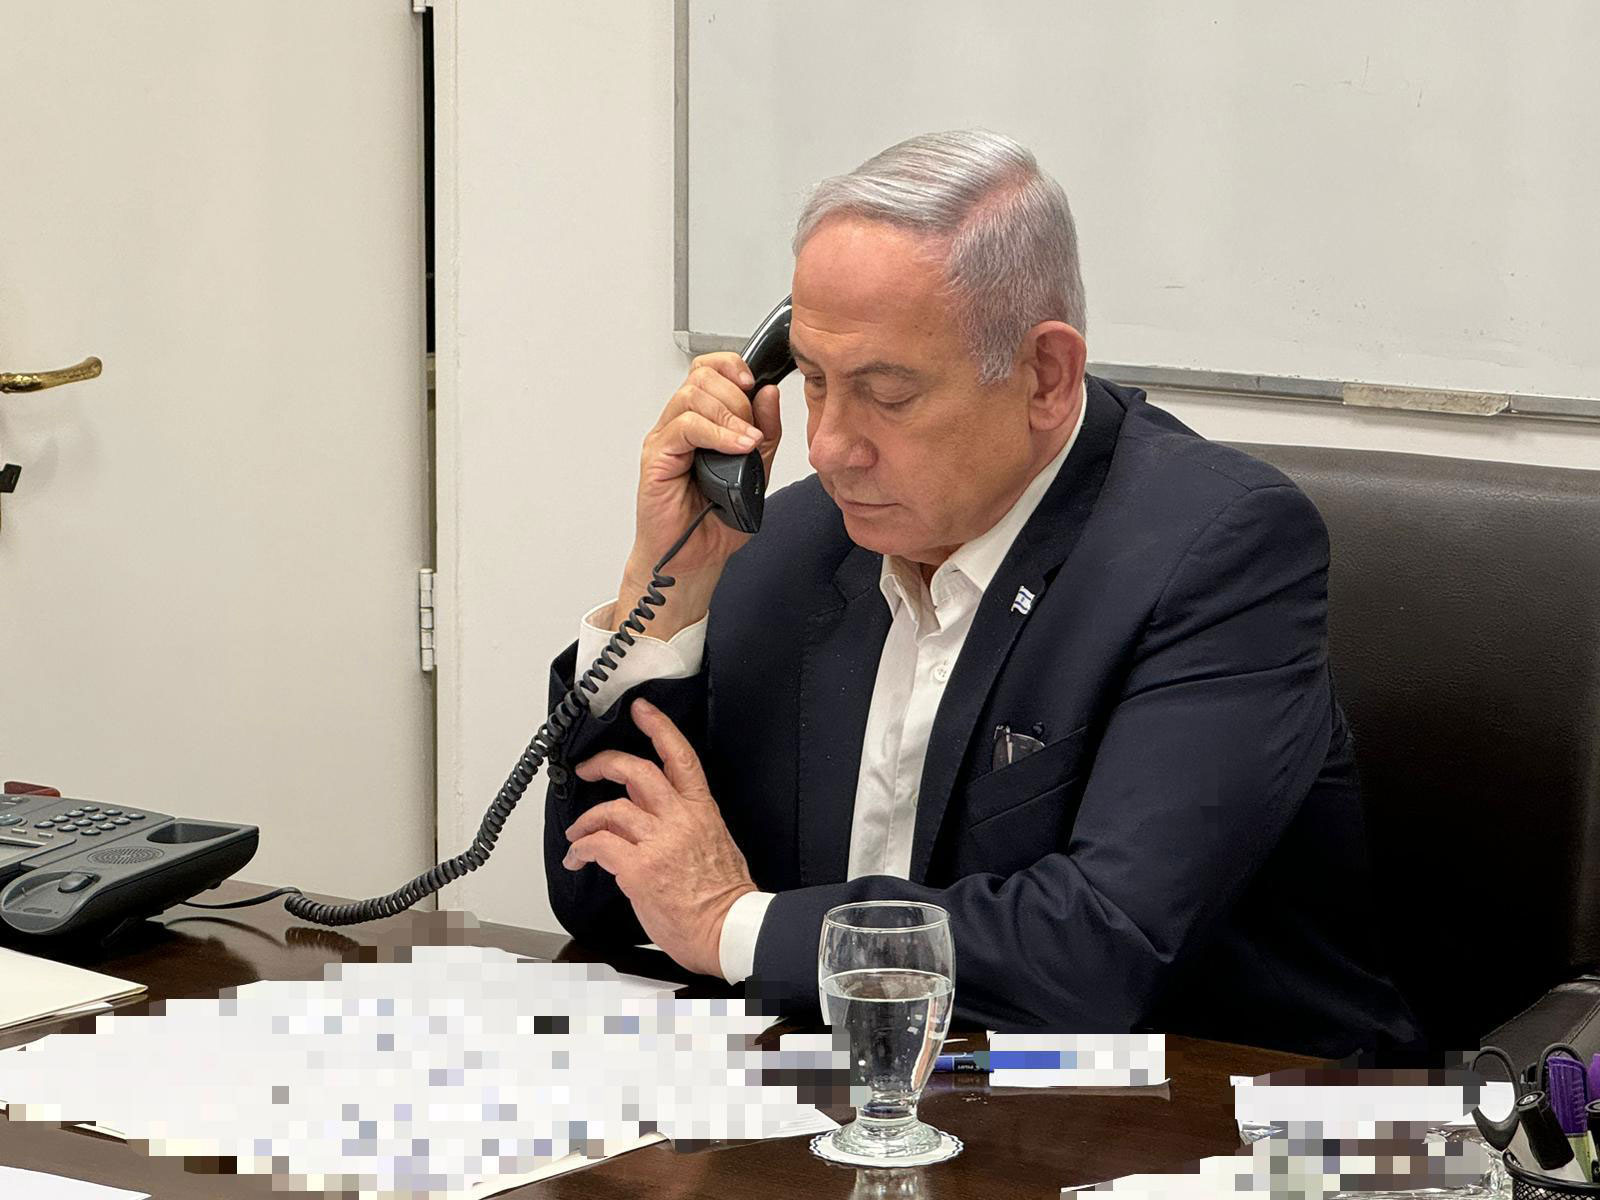 In this handout photo, released early Sunday local time, Israeli Prime Minister Benjamin Netanyahu talks on the phone with US President Joe Biden. Portions of this photo have been blurred by the source. 